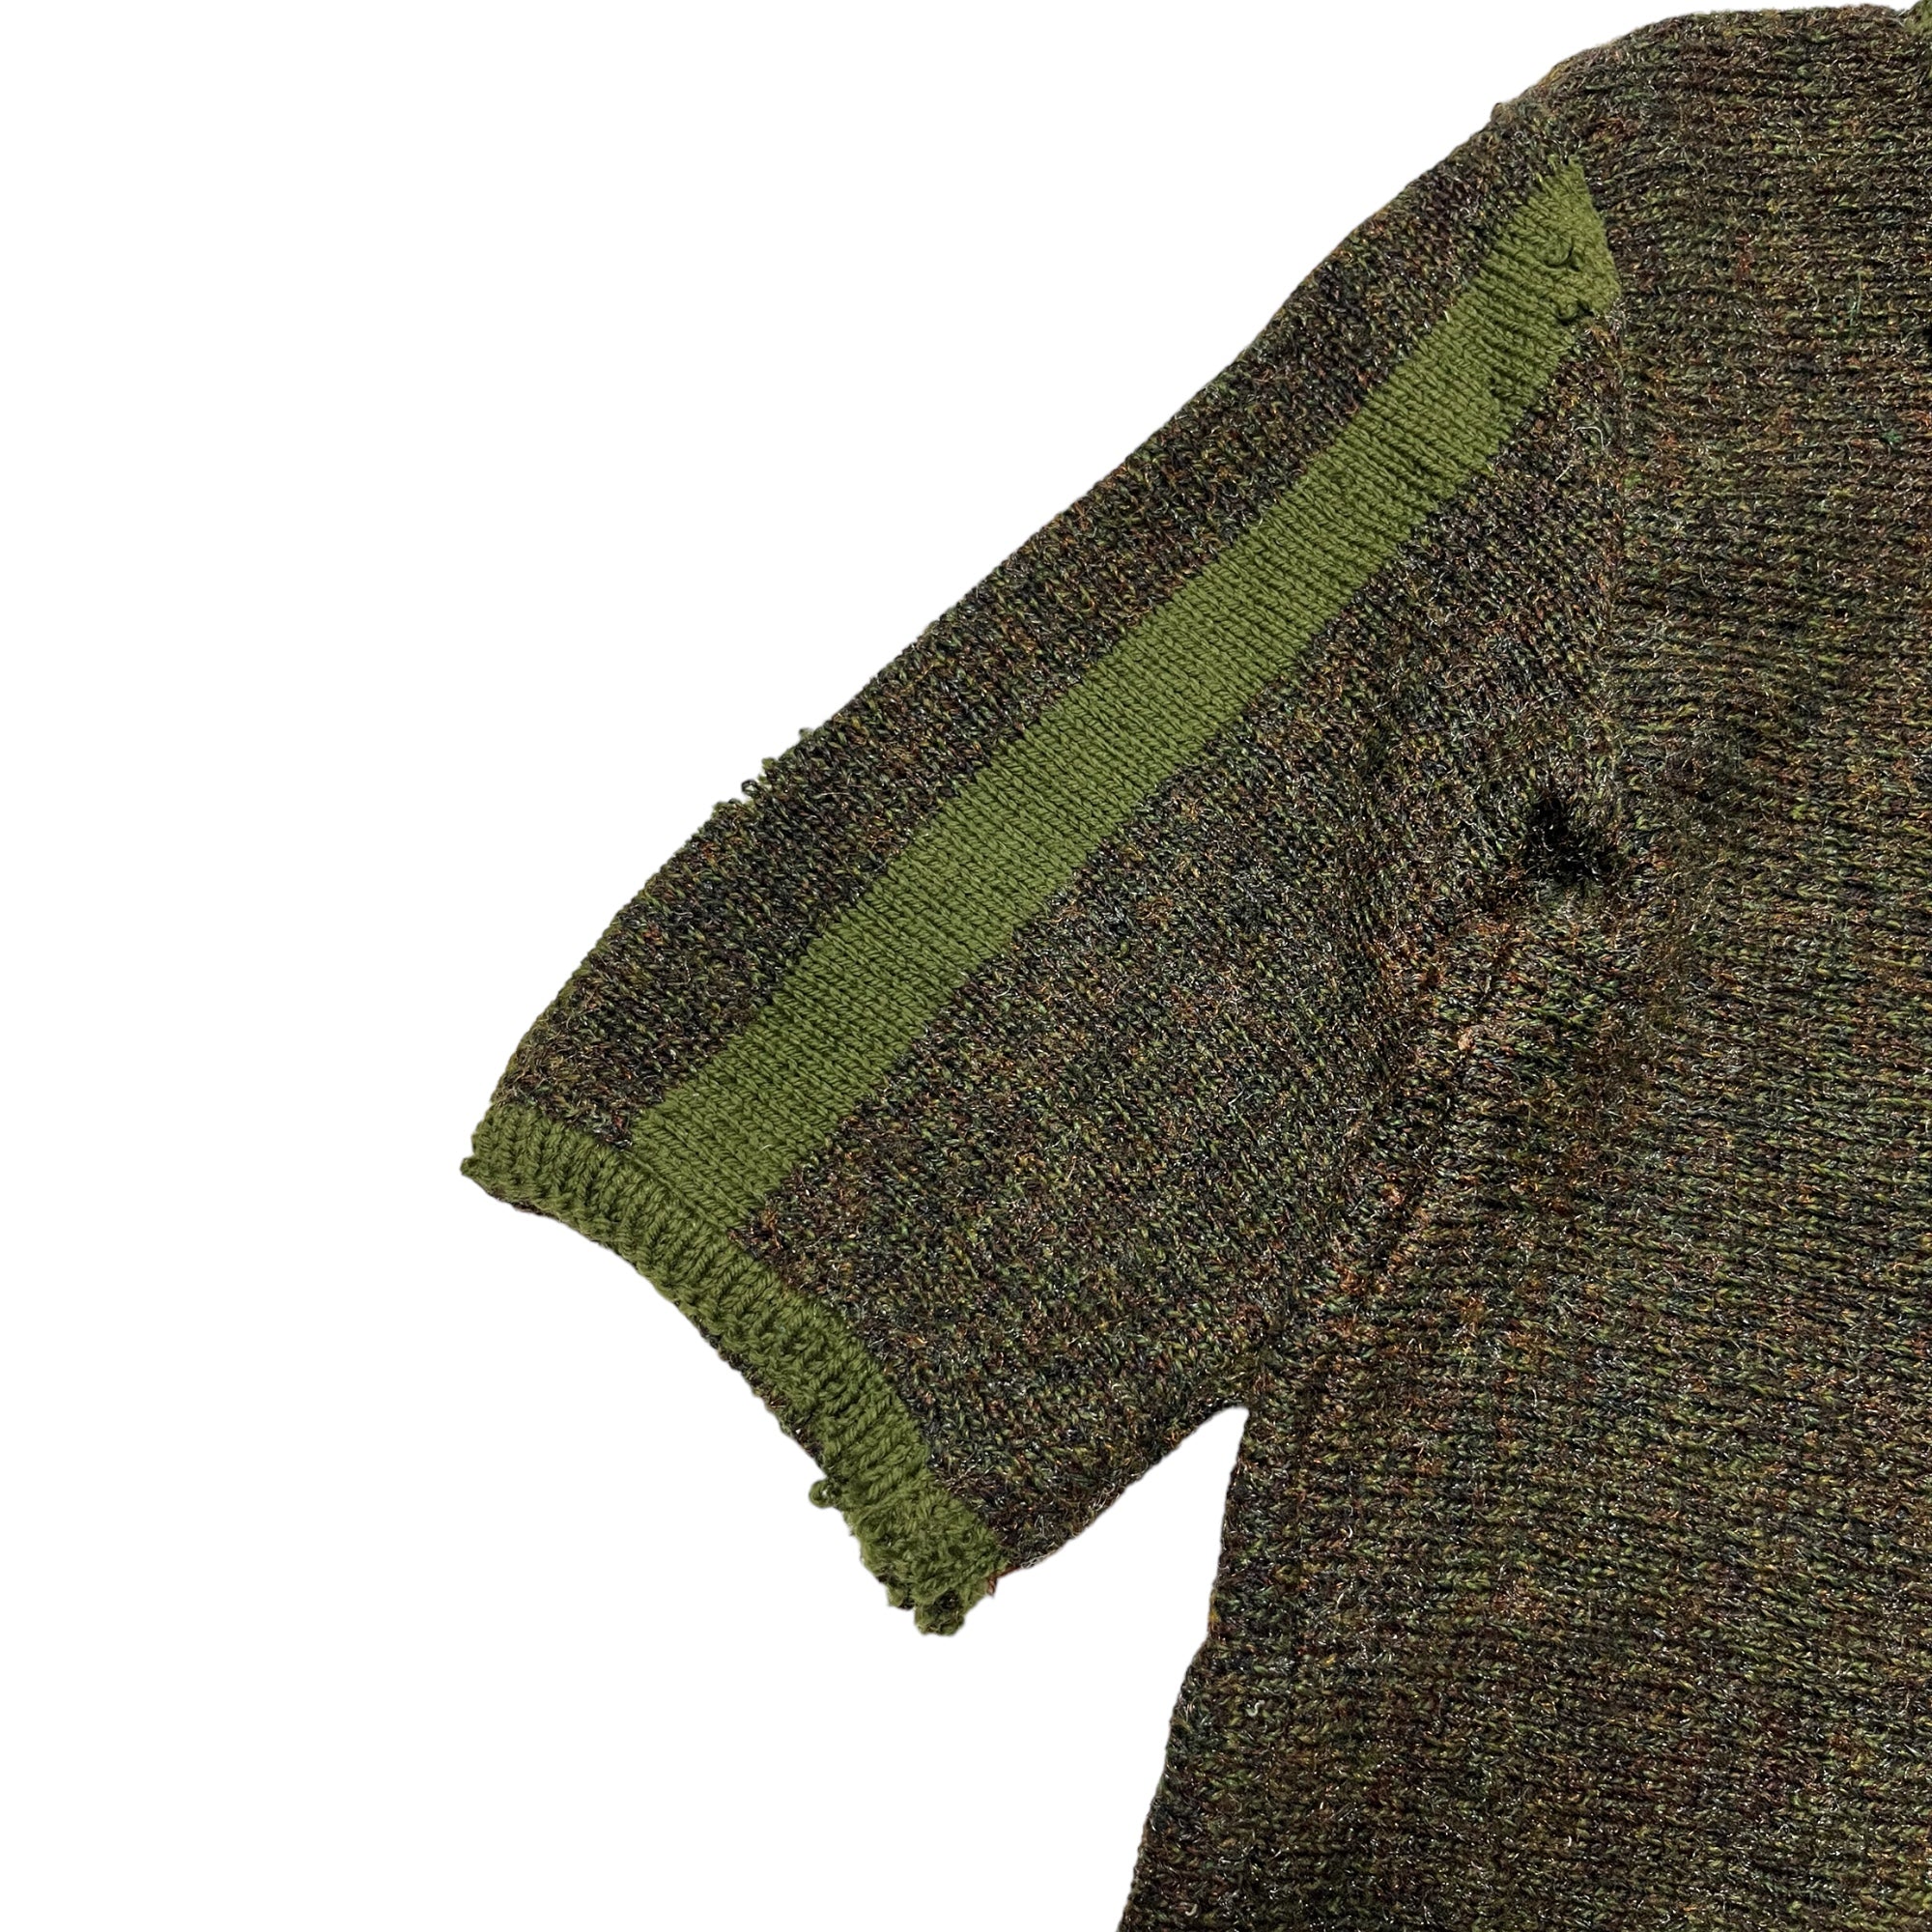 1930s Distressed French Quarter-Zip Farmer’s Knit Sweater - Olive/Brown - S/M